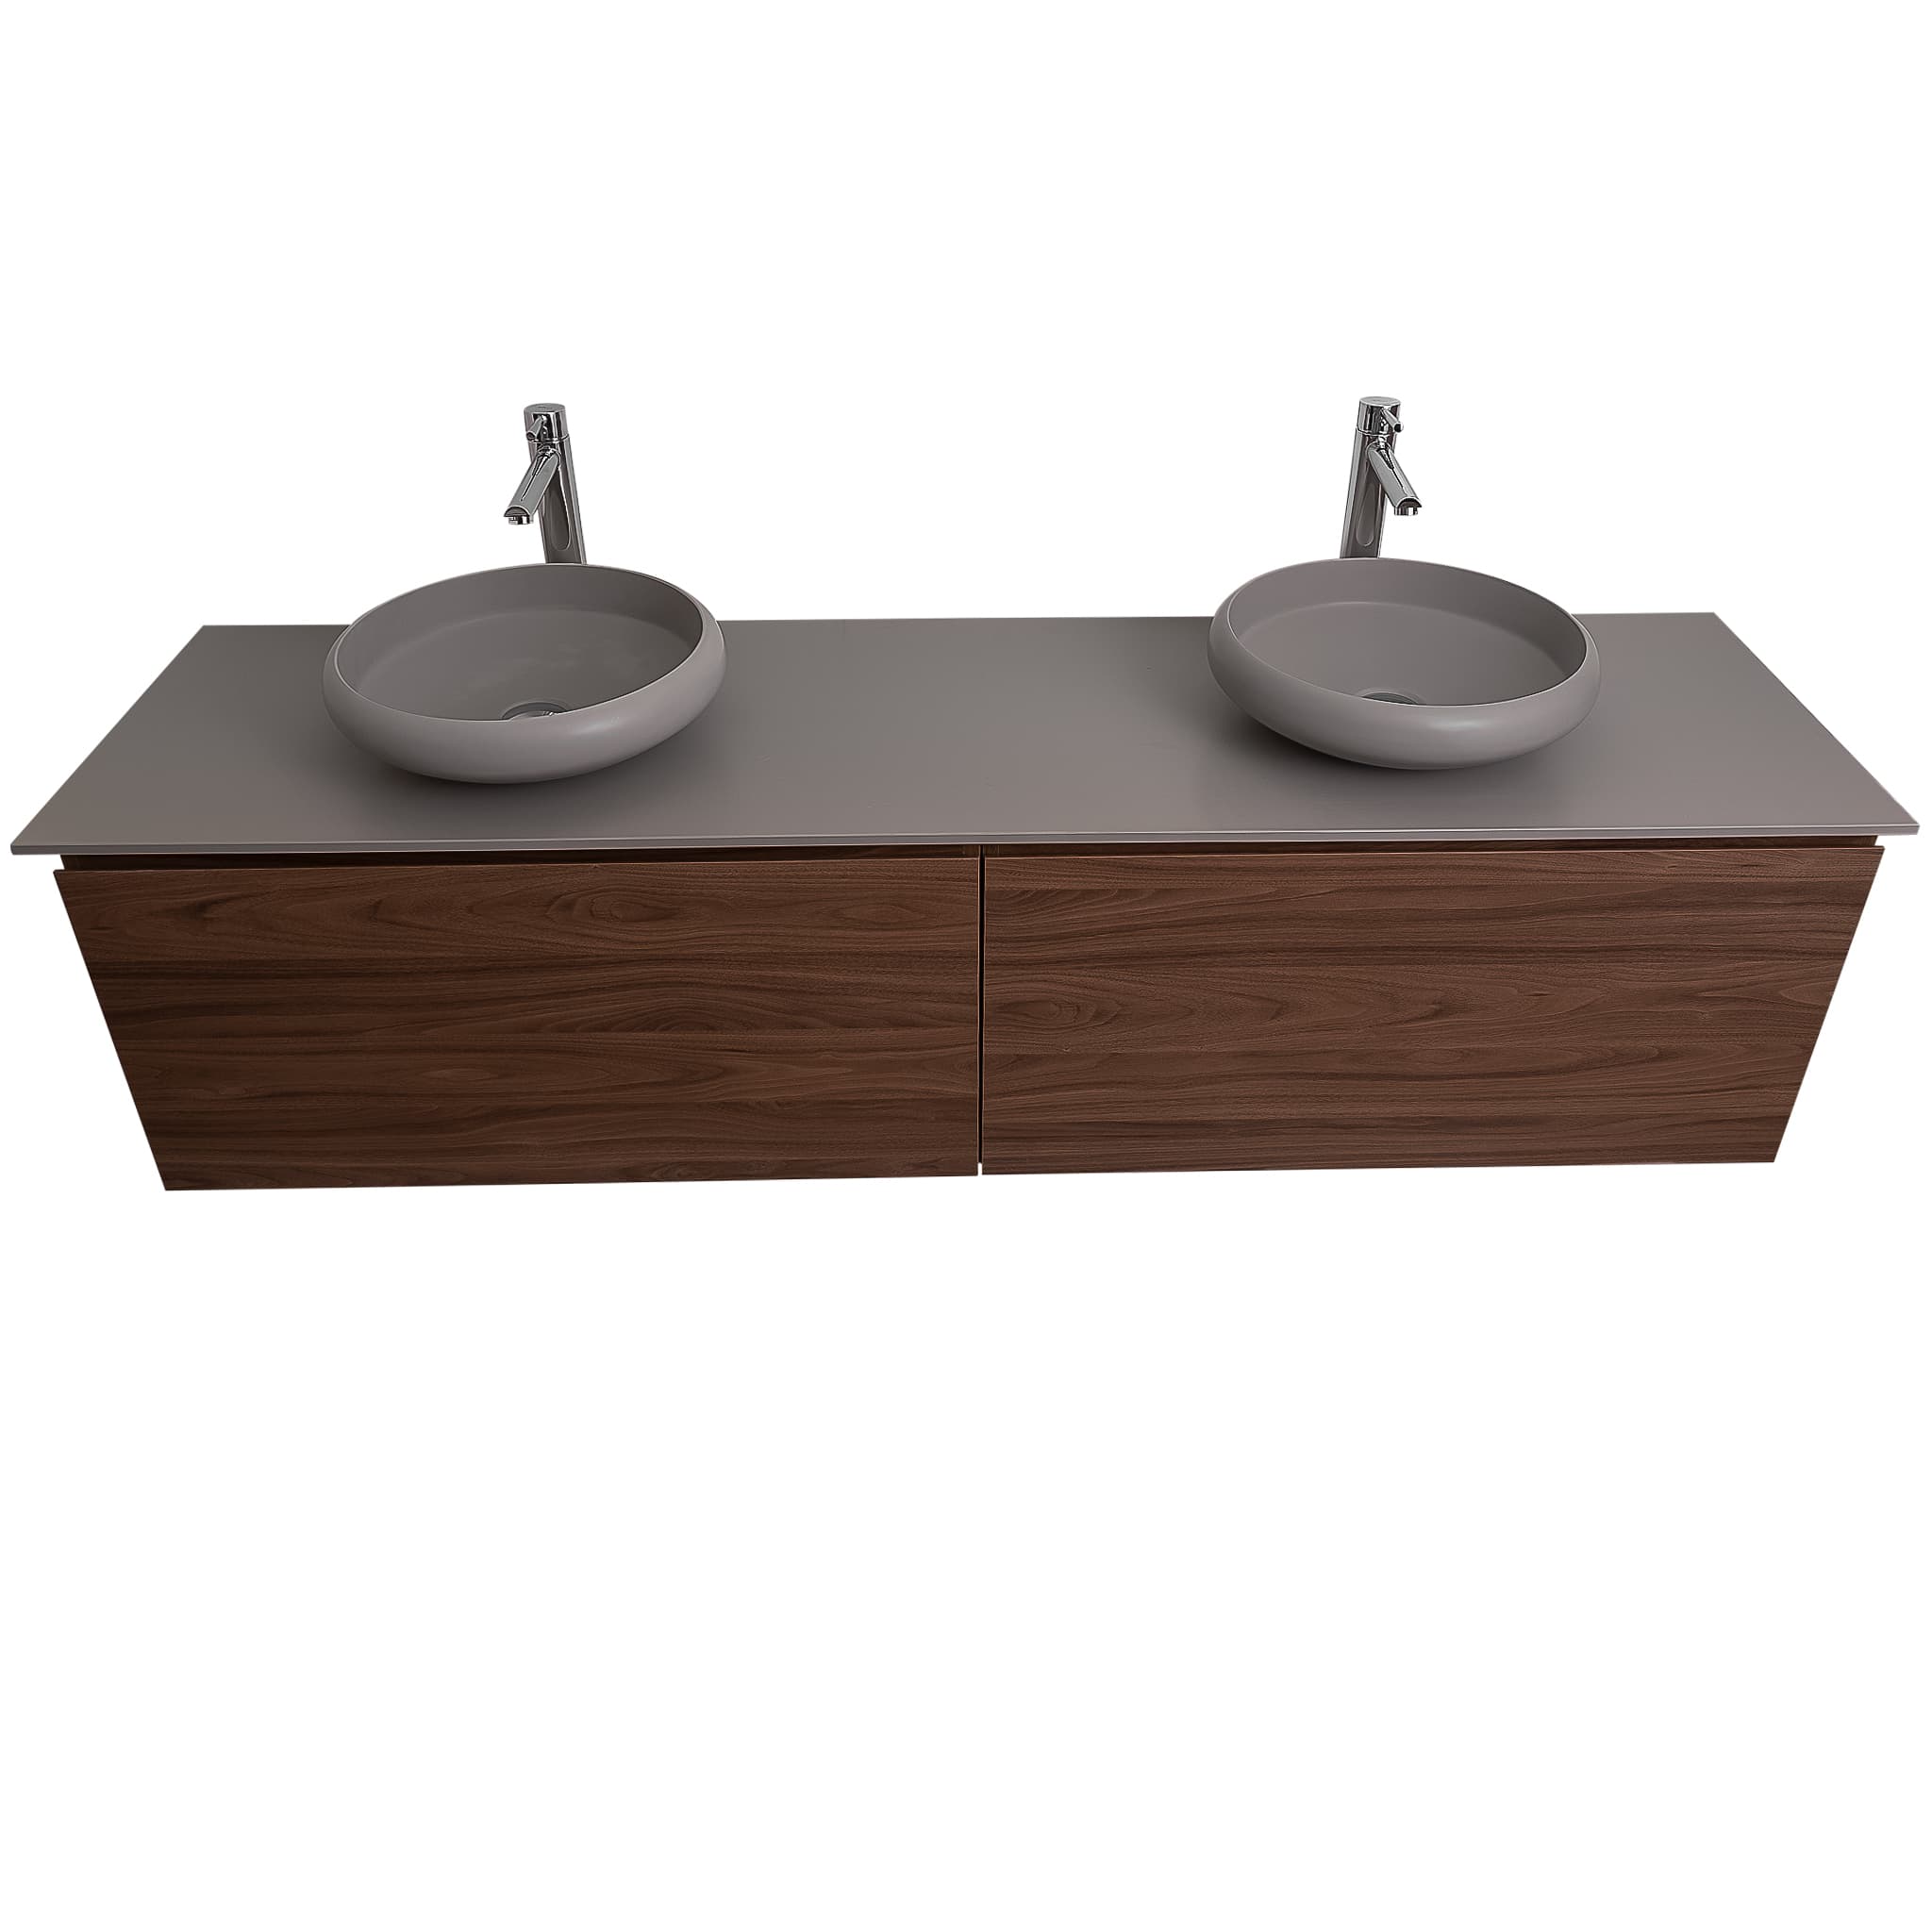 Venice 63 Walnut Wood Texture Cabinet, Solid Surface Flat Grey Counter And Two Round Solid Surface Grey Basin 1153, Wall Mounted Modern Vanity Set